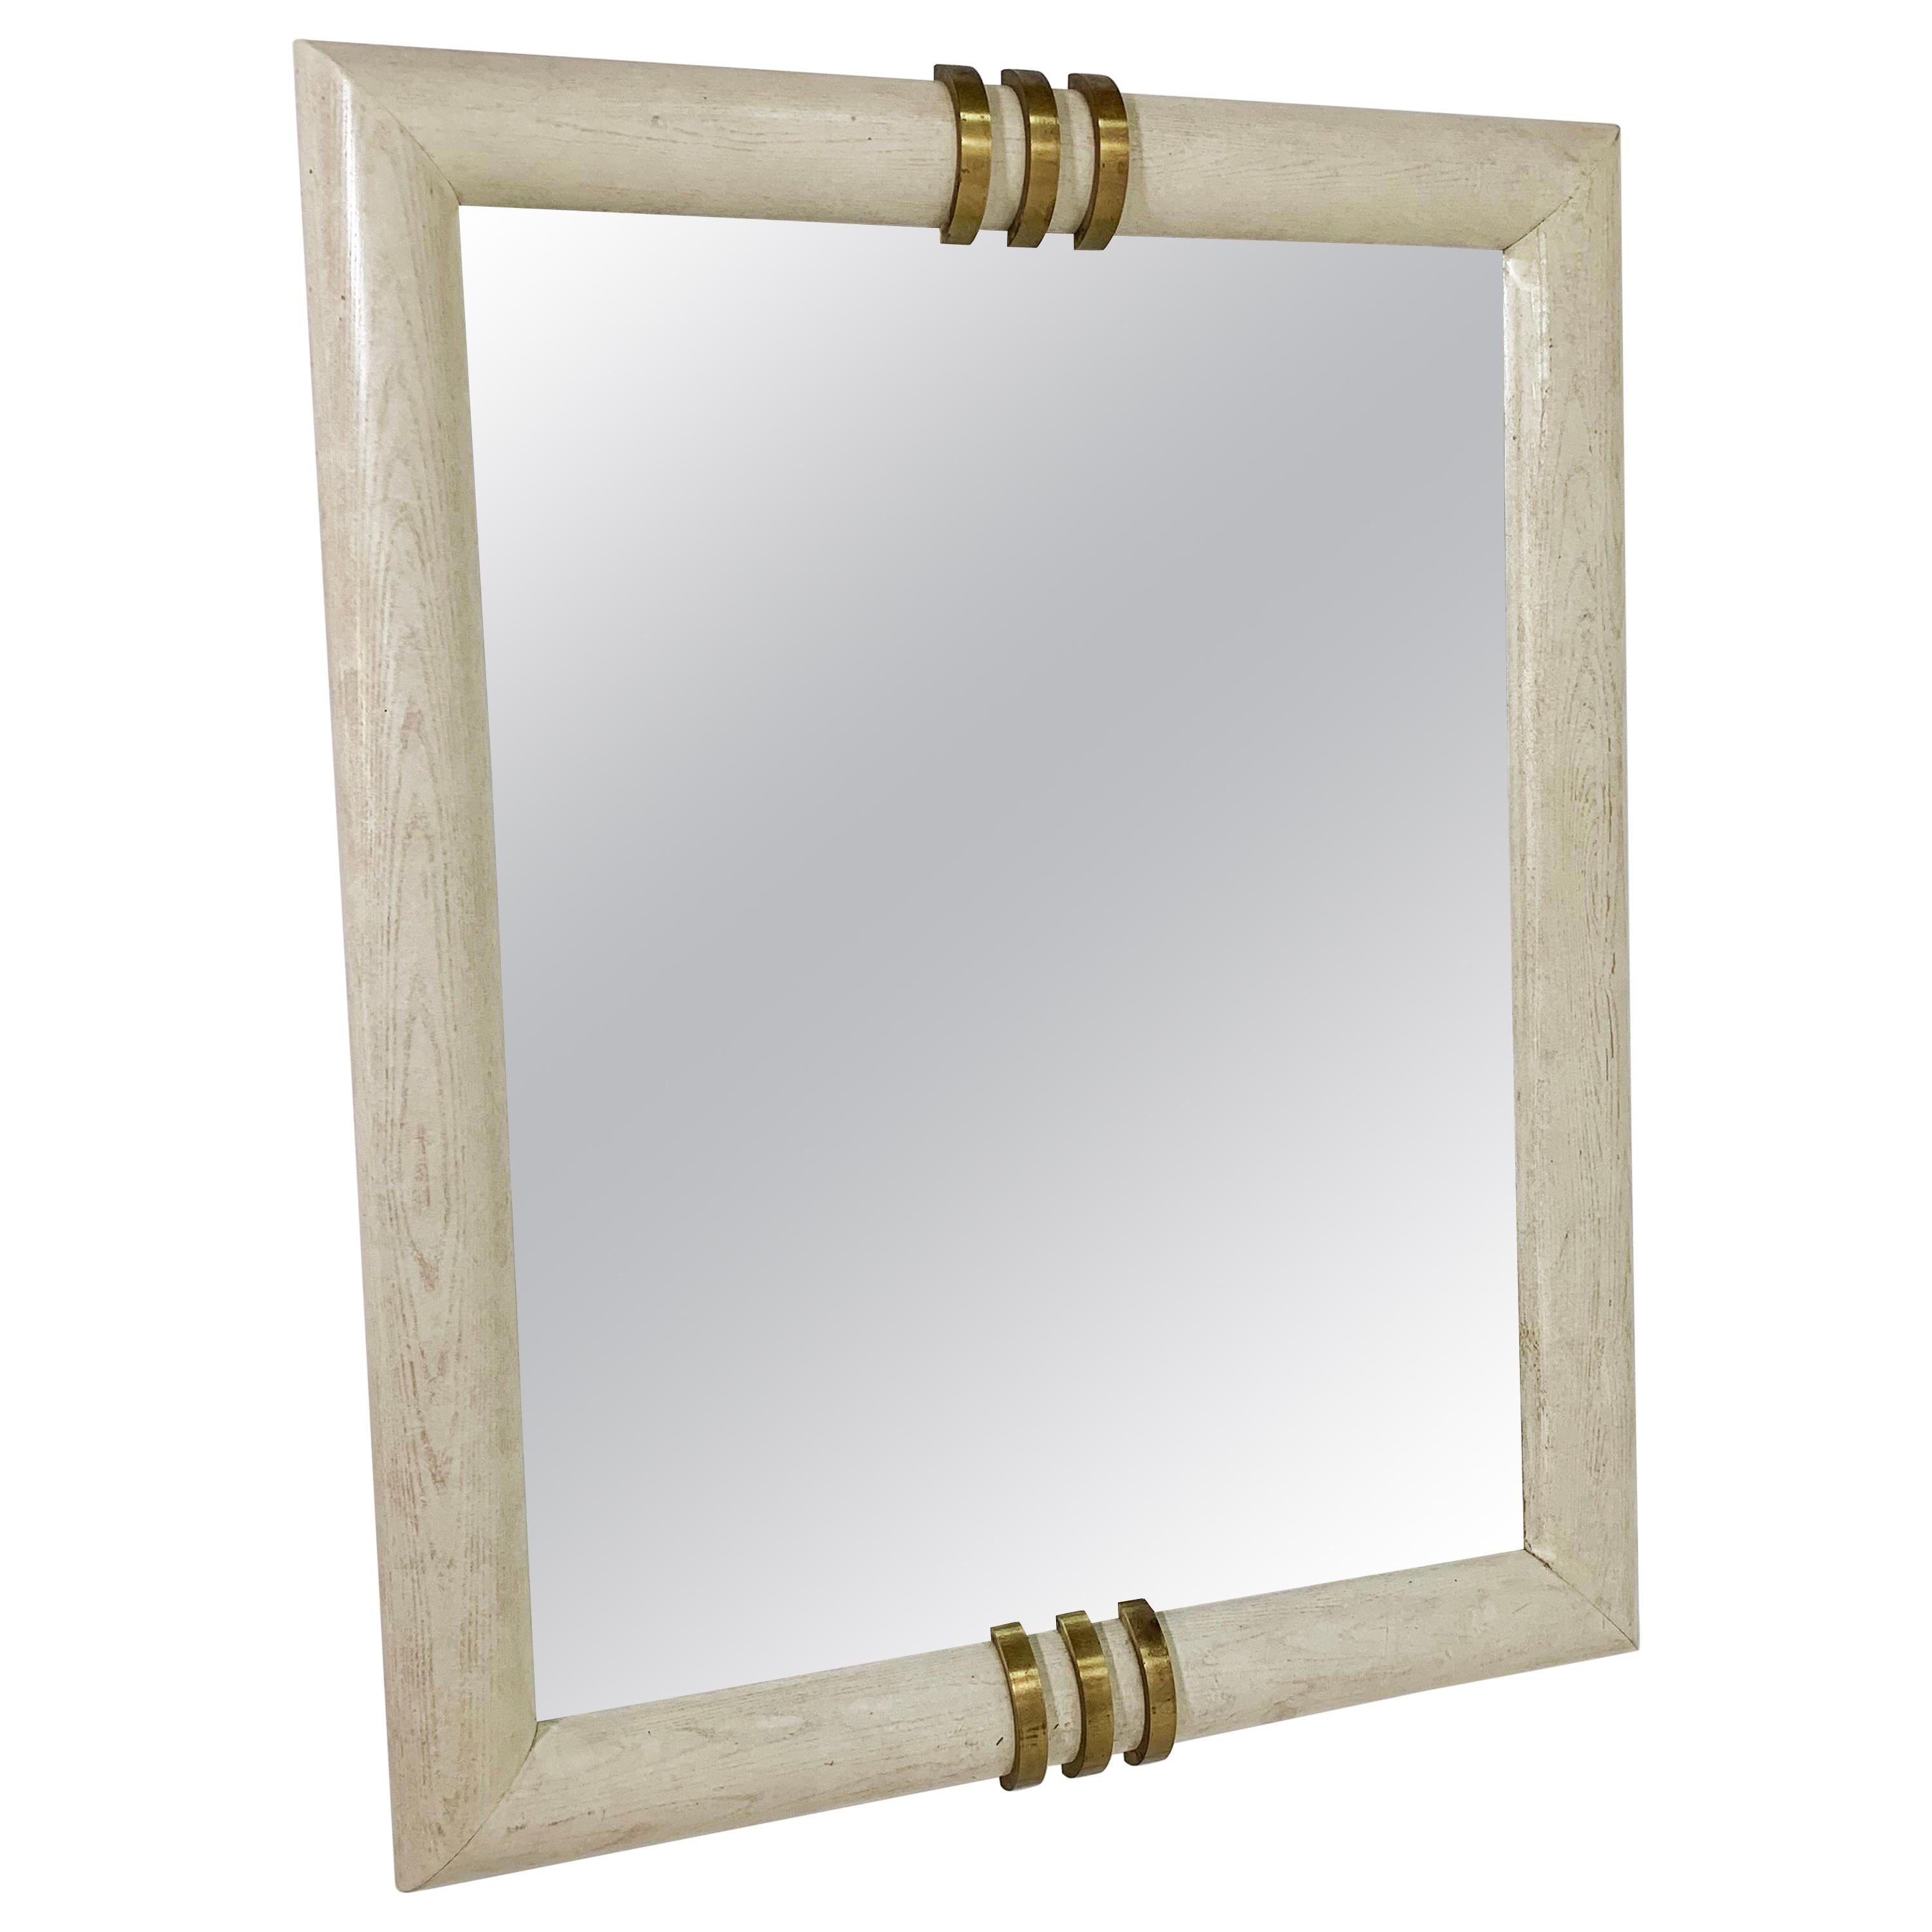 Monumental Wall Mirror in White Washed Oak and Bronze by Henredon, ca. 1980s